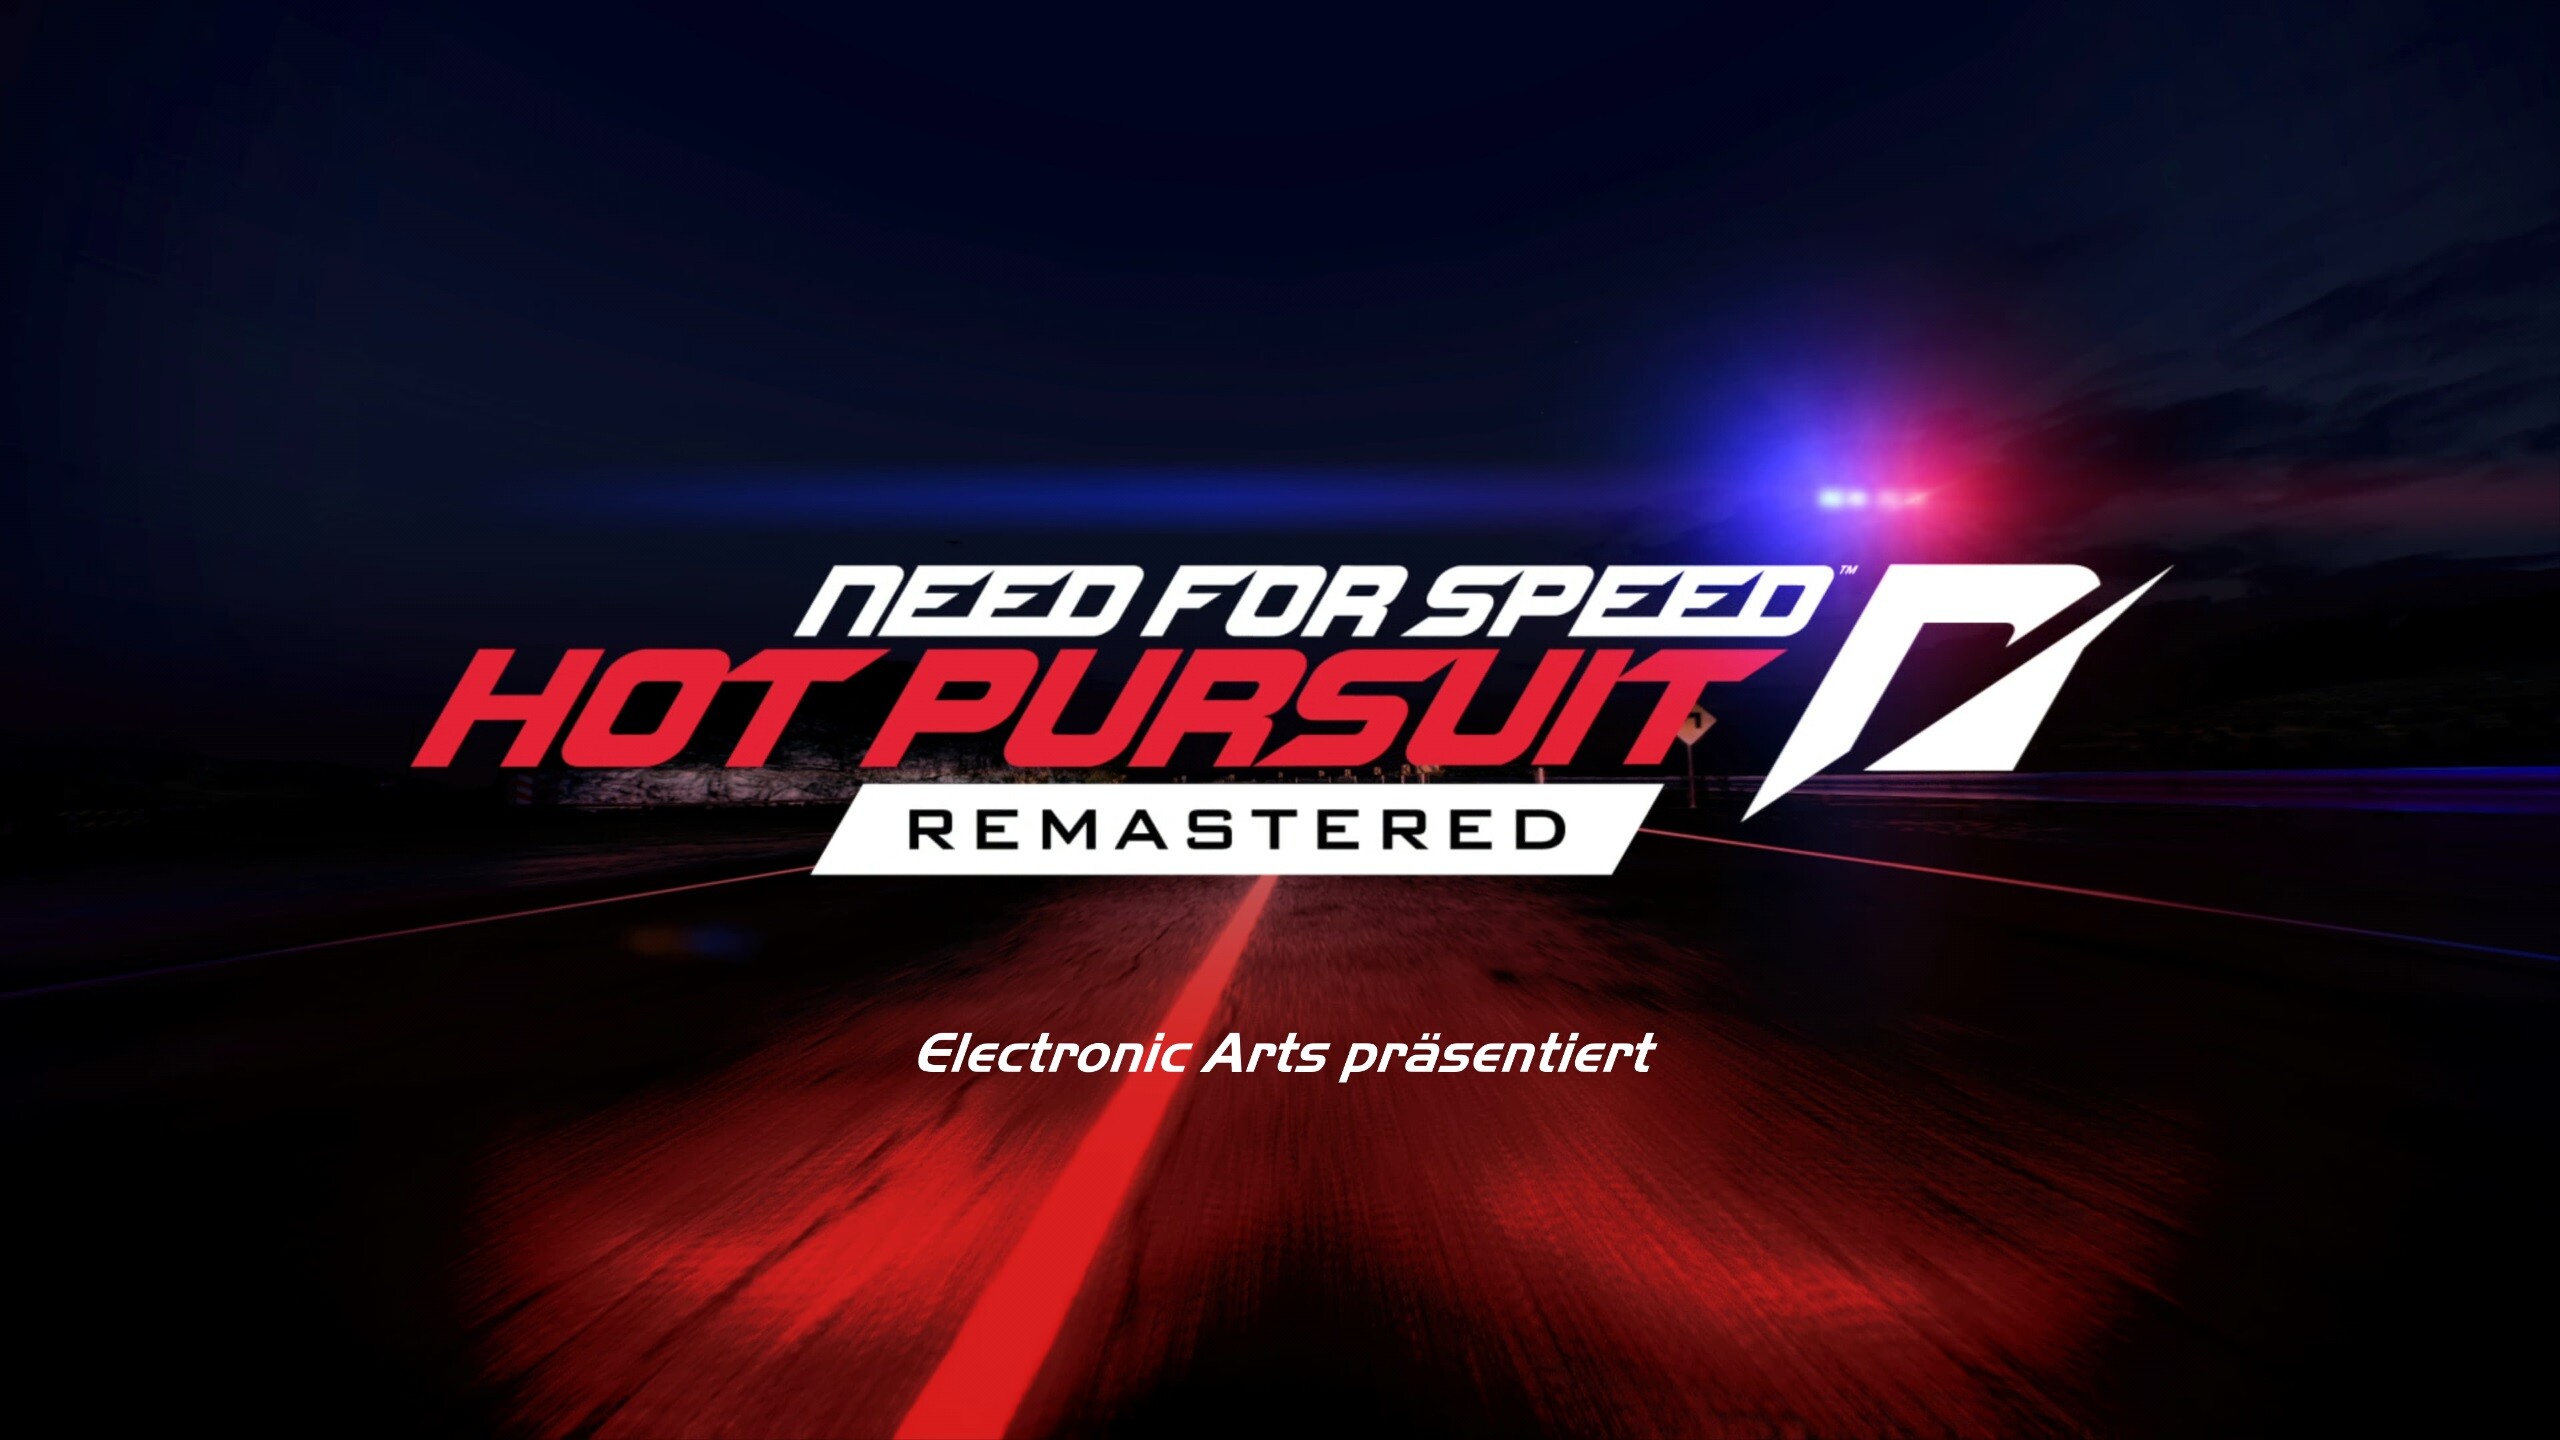 Need for Speed Hot Pursuit Remastered: Published by Electronic Arts, Won a BAFTA Award for its Autolog multiplayer component. 2560x1440 HD Wallpaper.